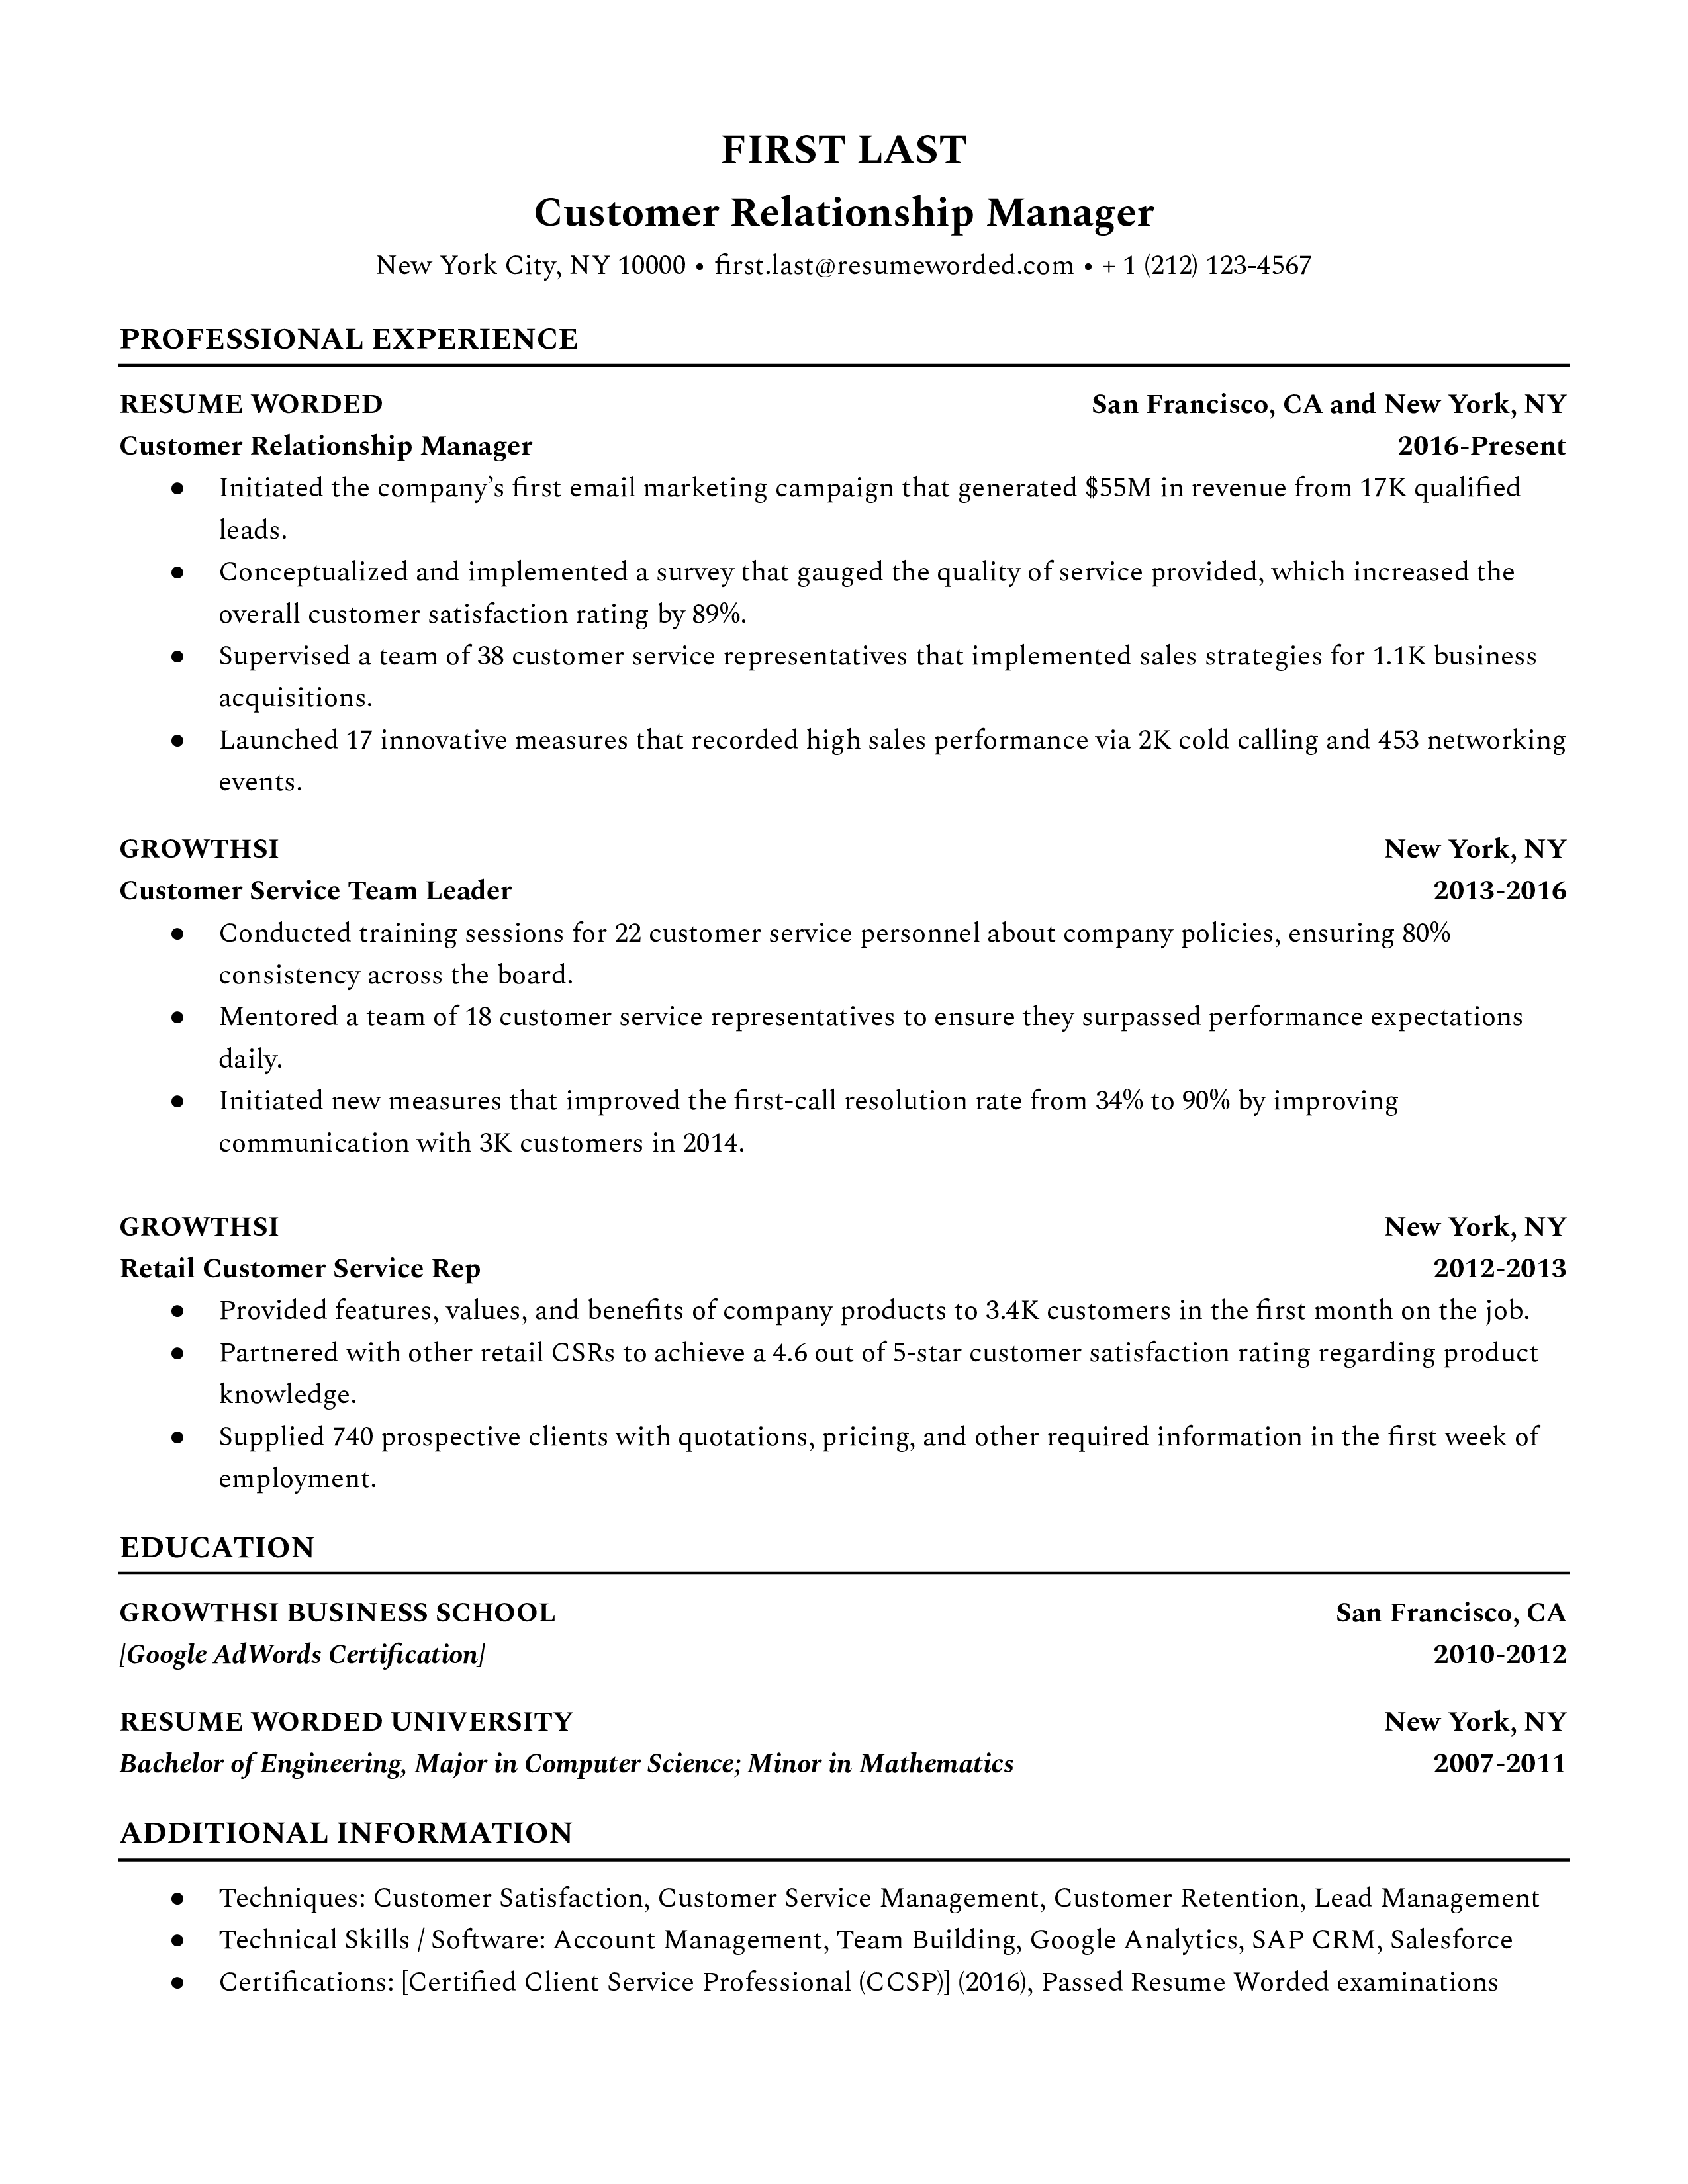 A customer relationship manager resume sample that highlights the applicant’s strong skill set and successful experience.